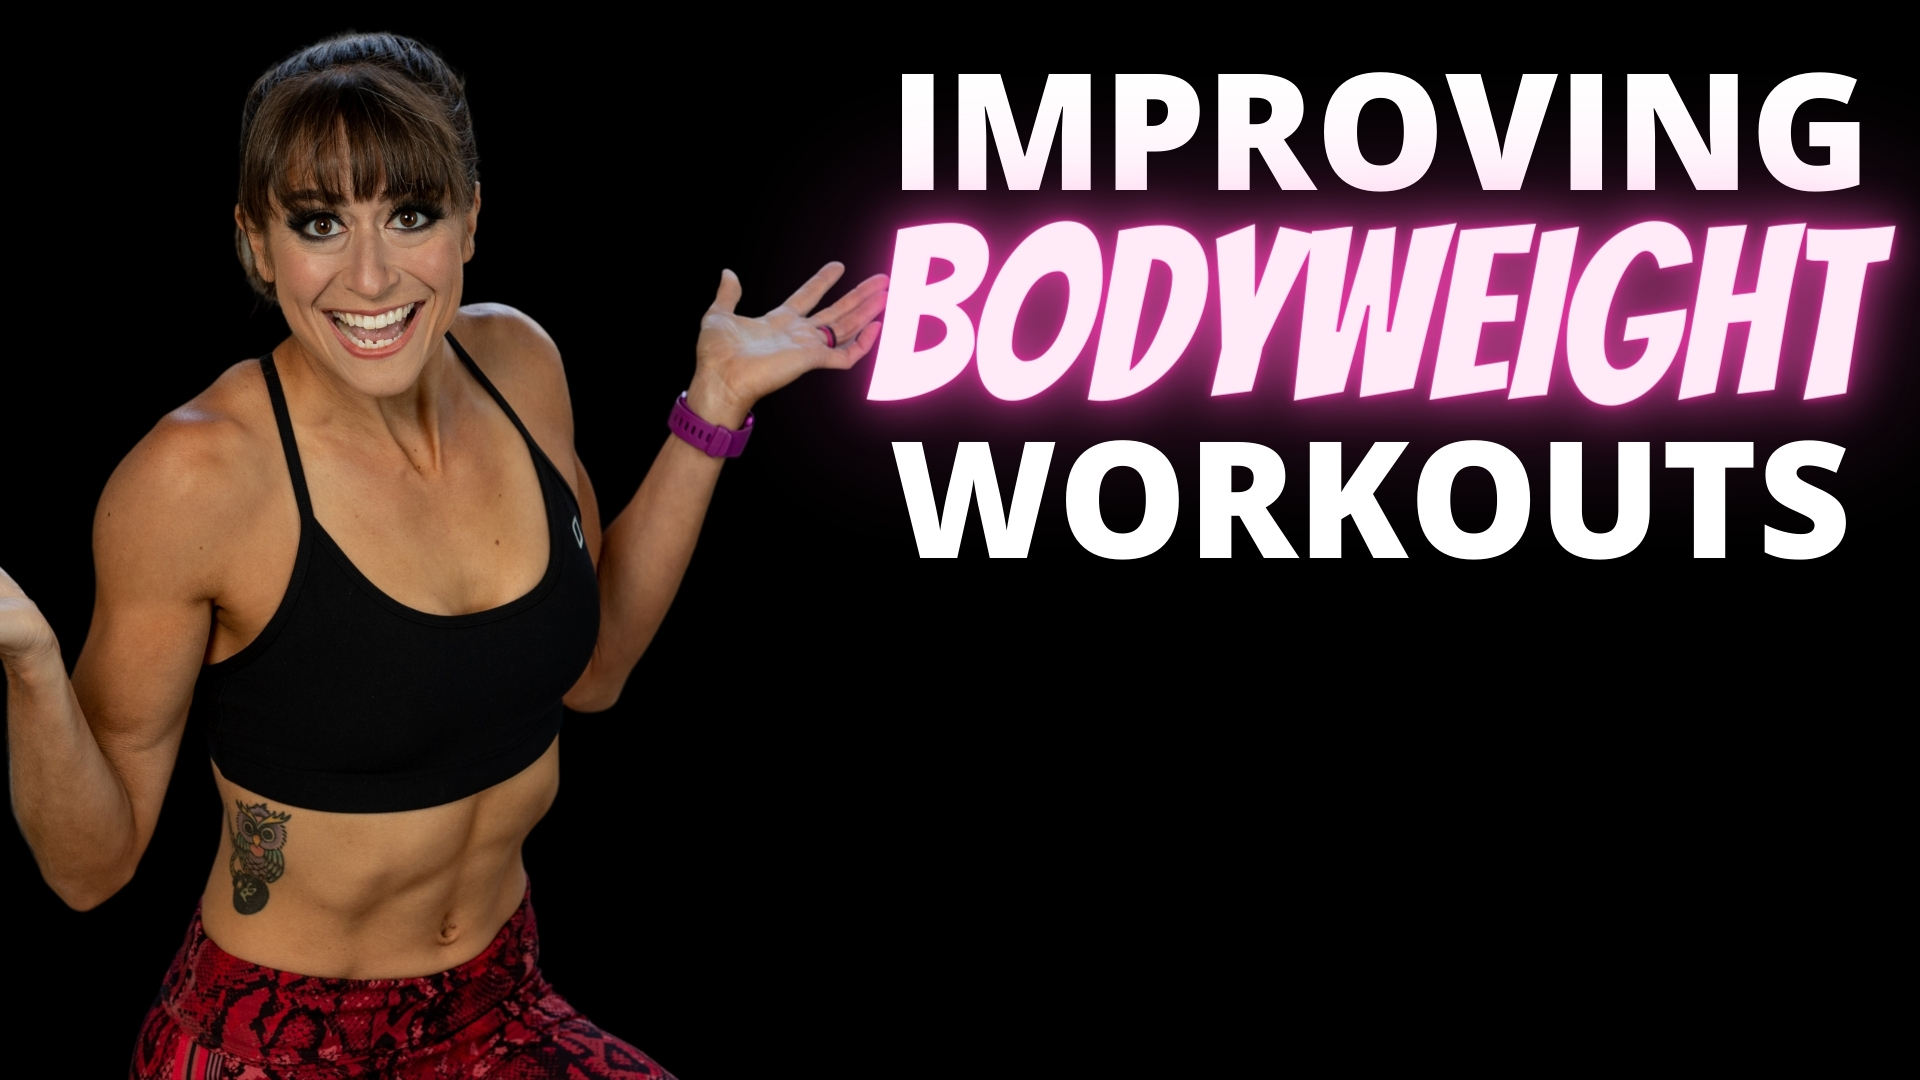 Improving Bodyweight Workouts